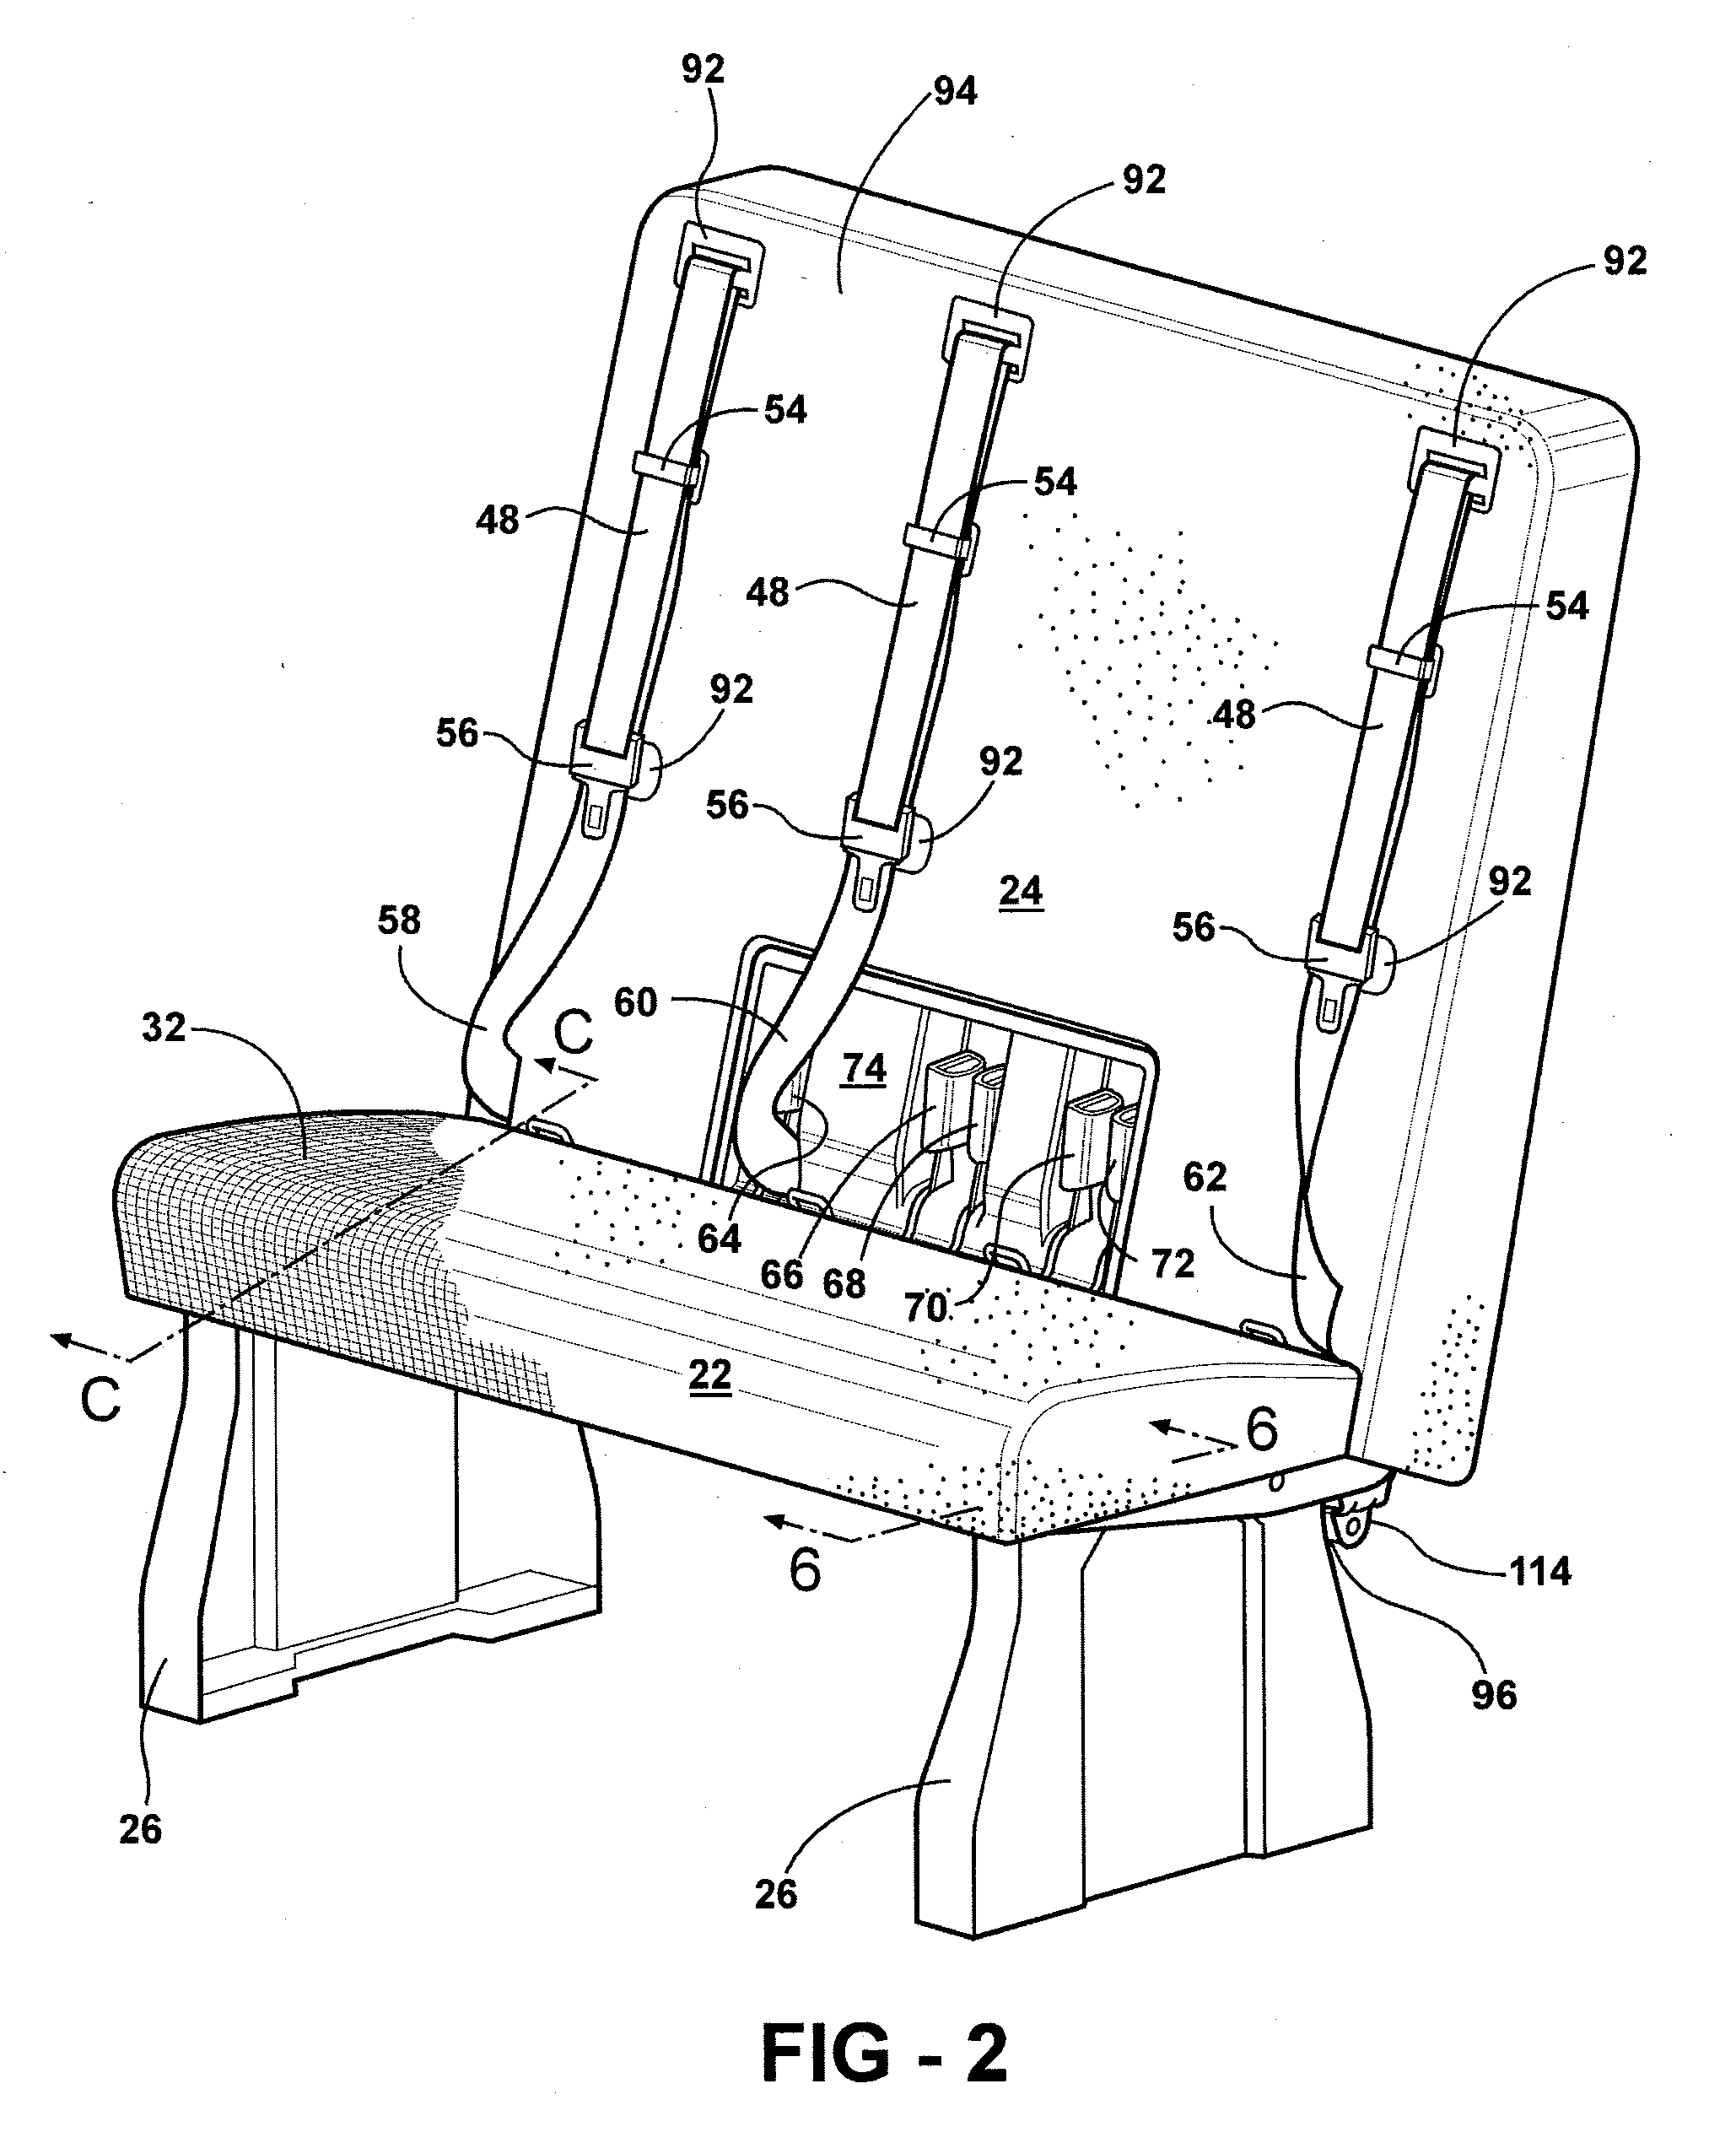 Seat assembly for a vehicle